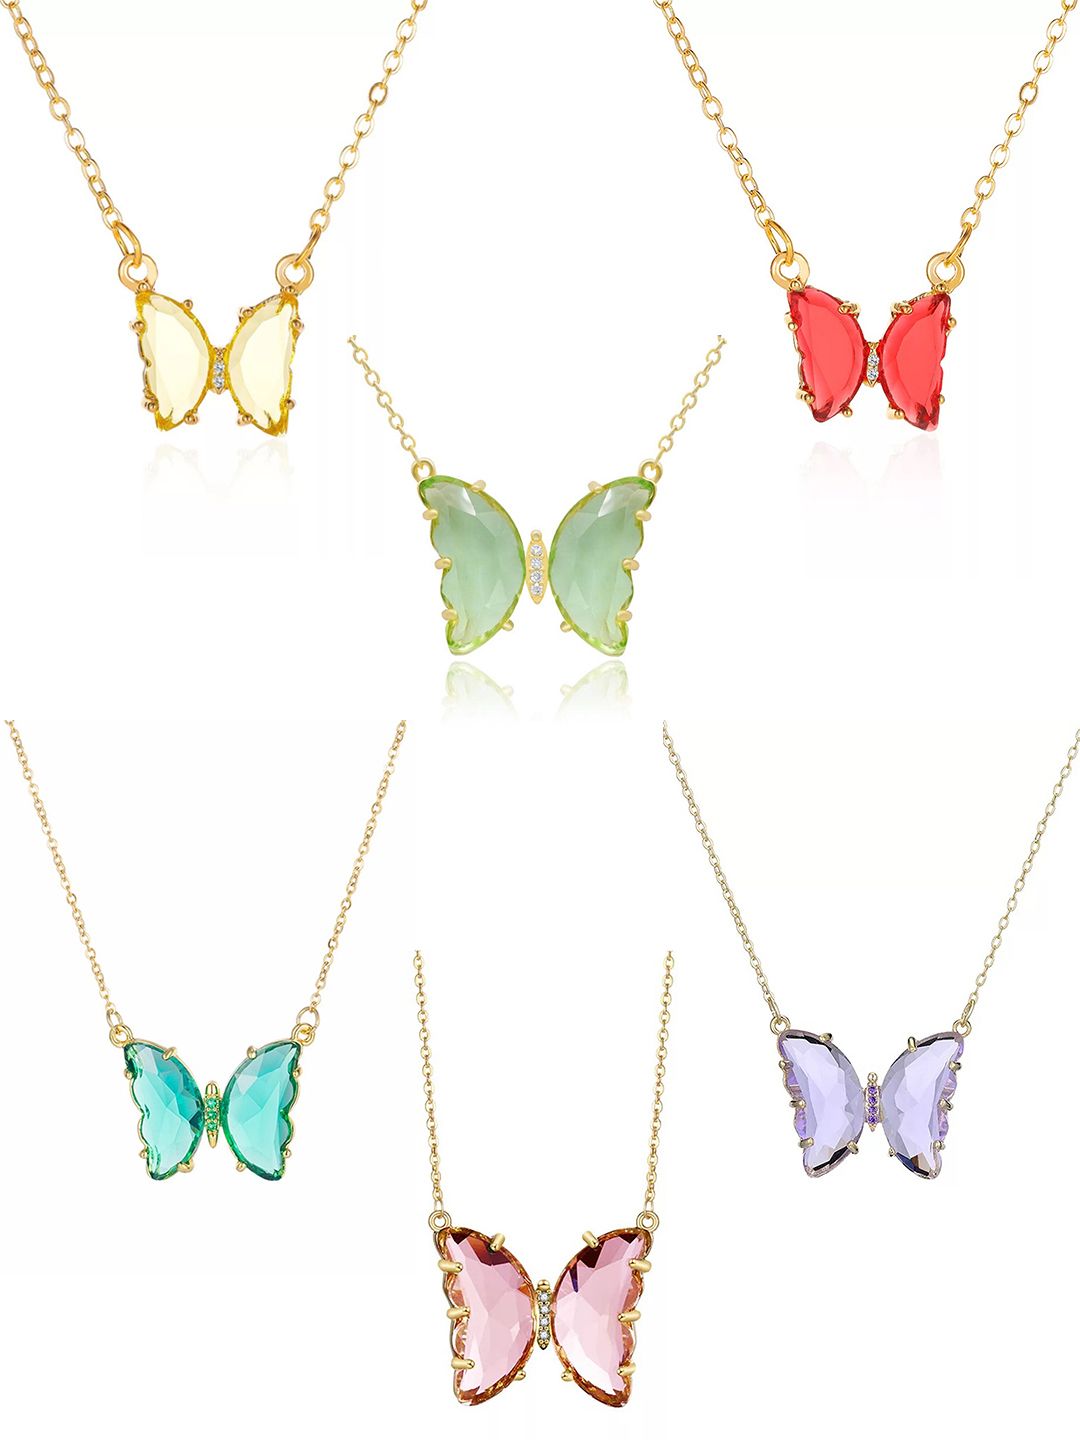 Vembley Set Of 6 Gold-Plated & Multicoloured Crystal Butterfly Pendant Necklace Price in India